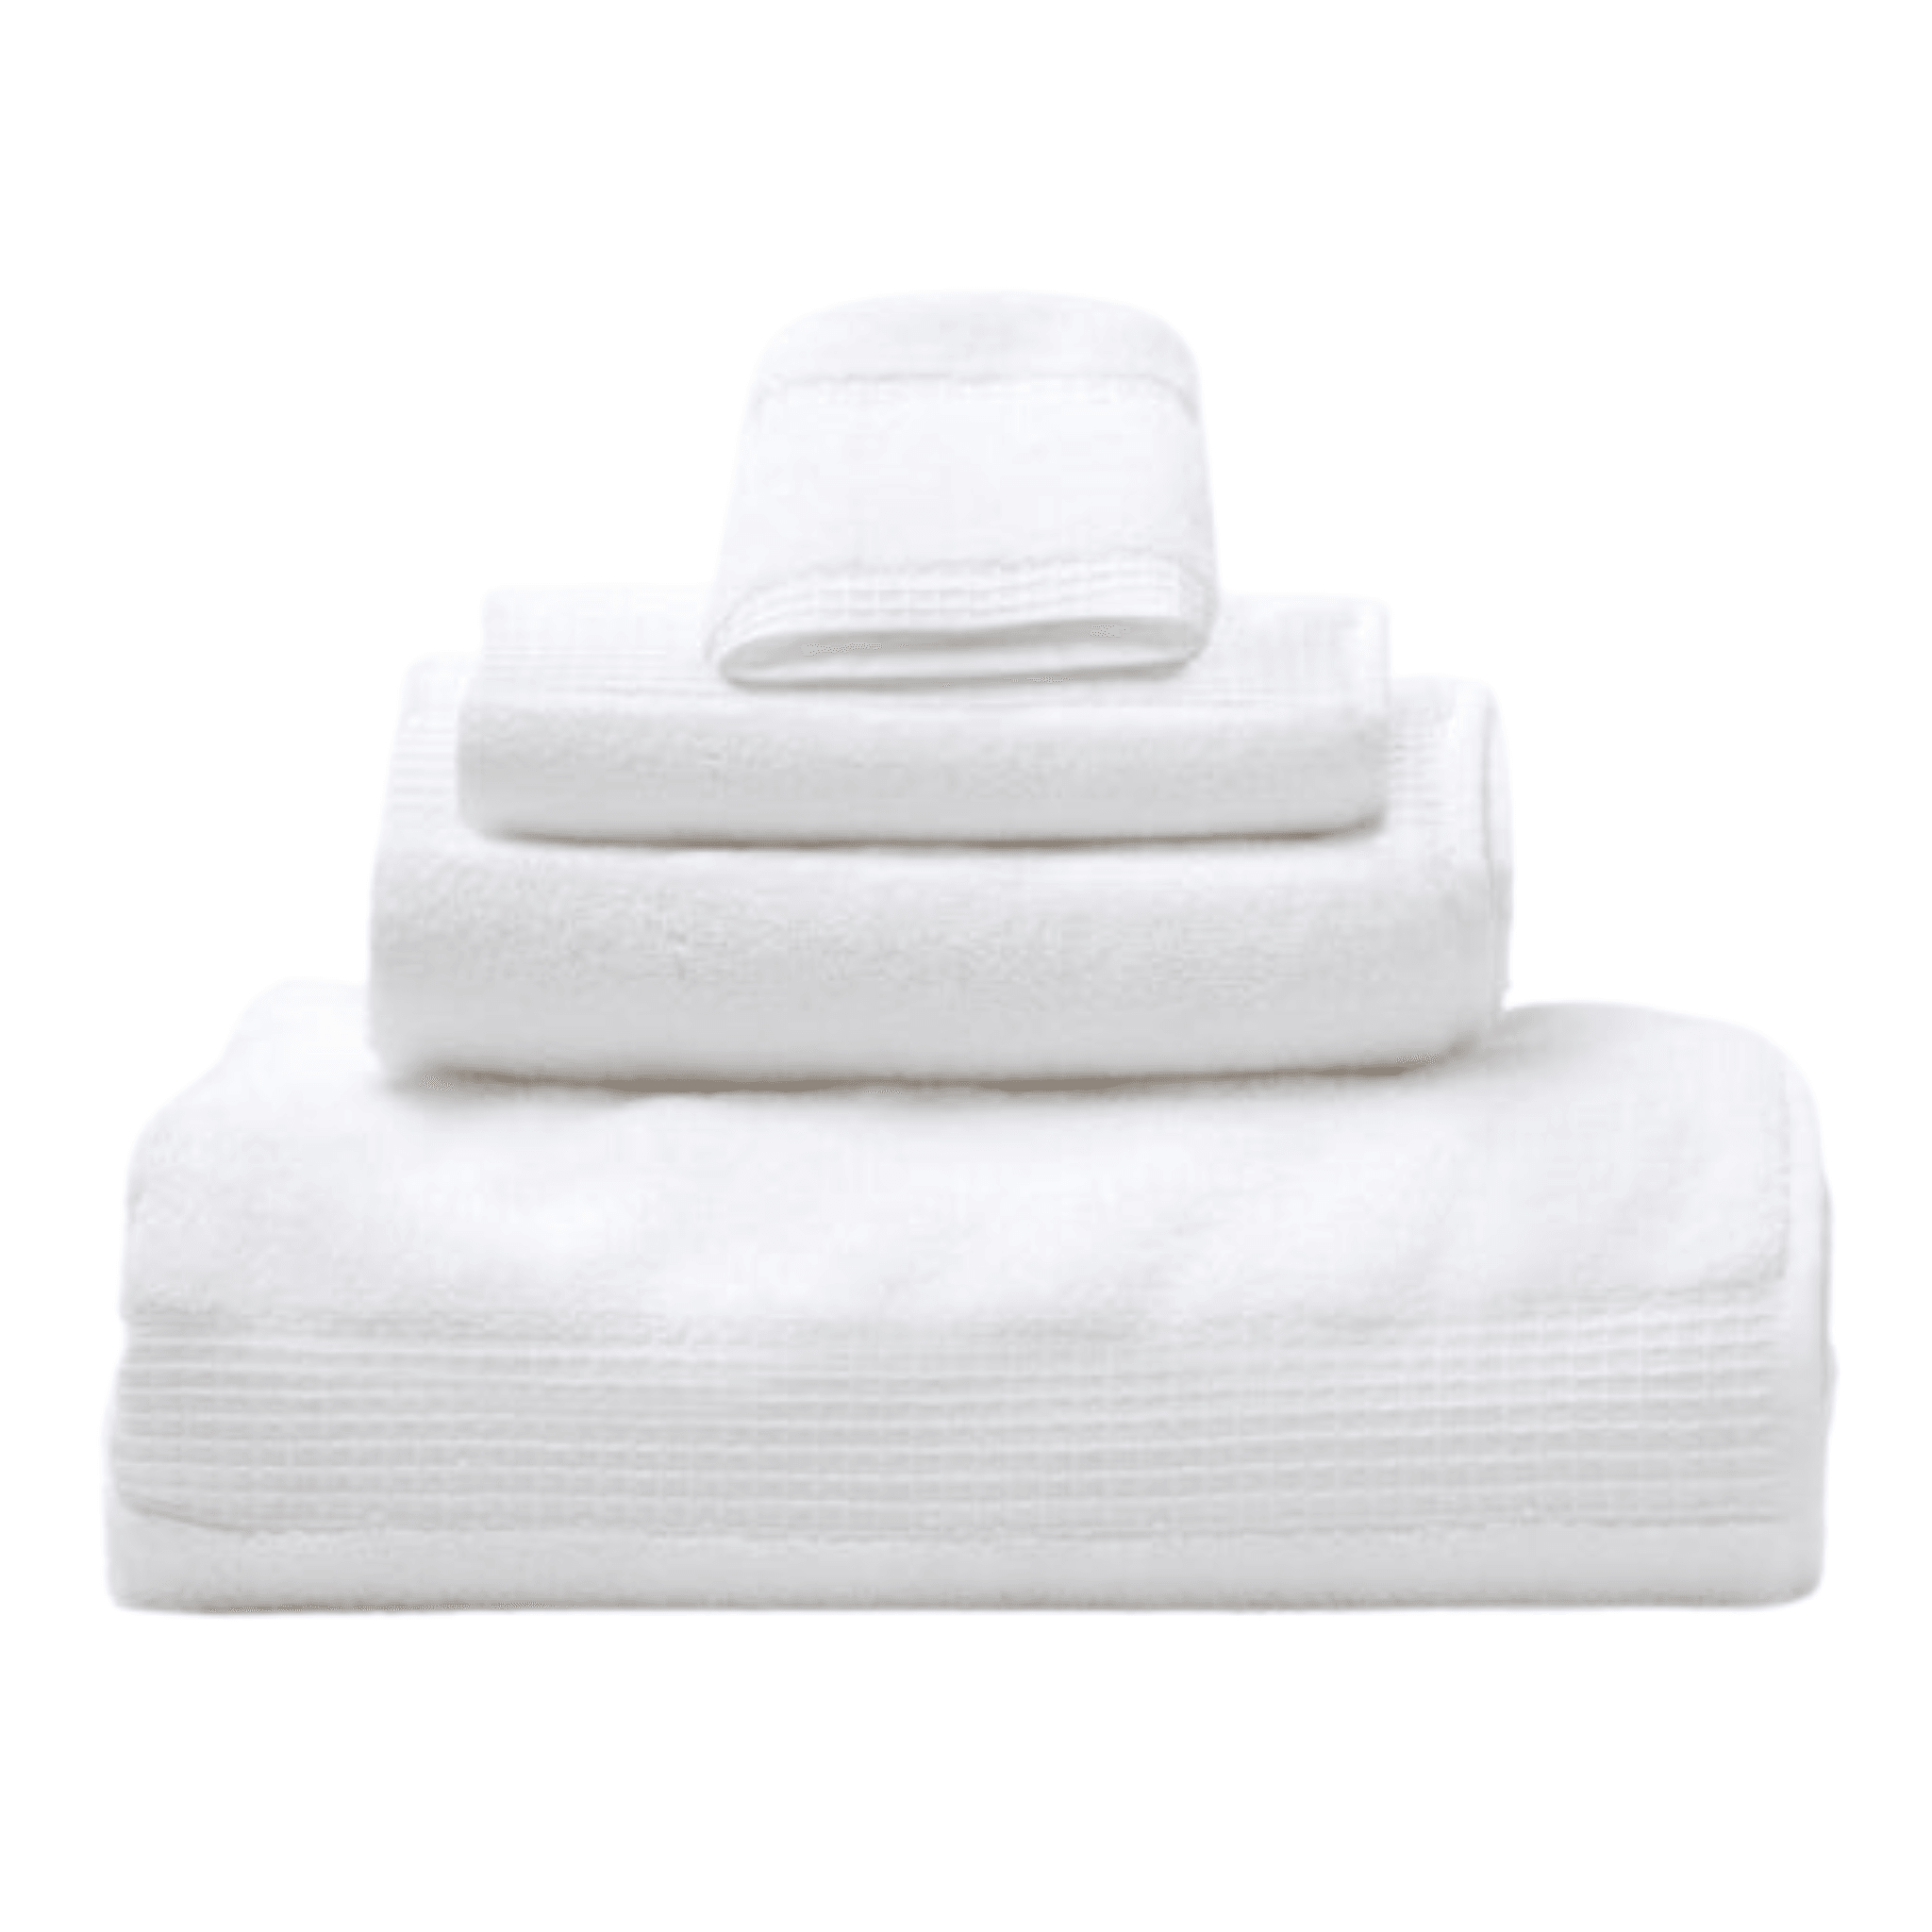 https://www.wellappointedhouse.com/cdn/shop/files/pigeon-and-poodle-annecy-plush-cotton-towel-set-in-white-bath-towels-the-well-appointed-house-1_f53ad91e-855c-4fc2-9156-1bcb28b5bbe0.png?v=1691660974